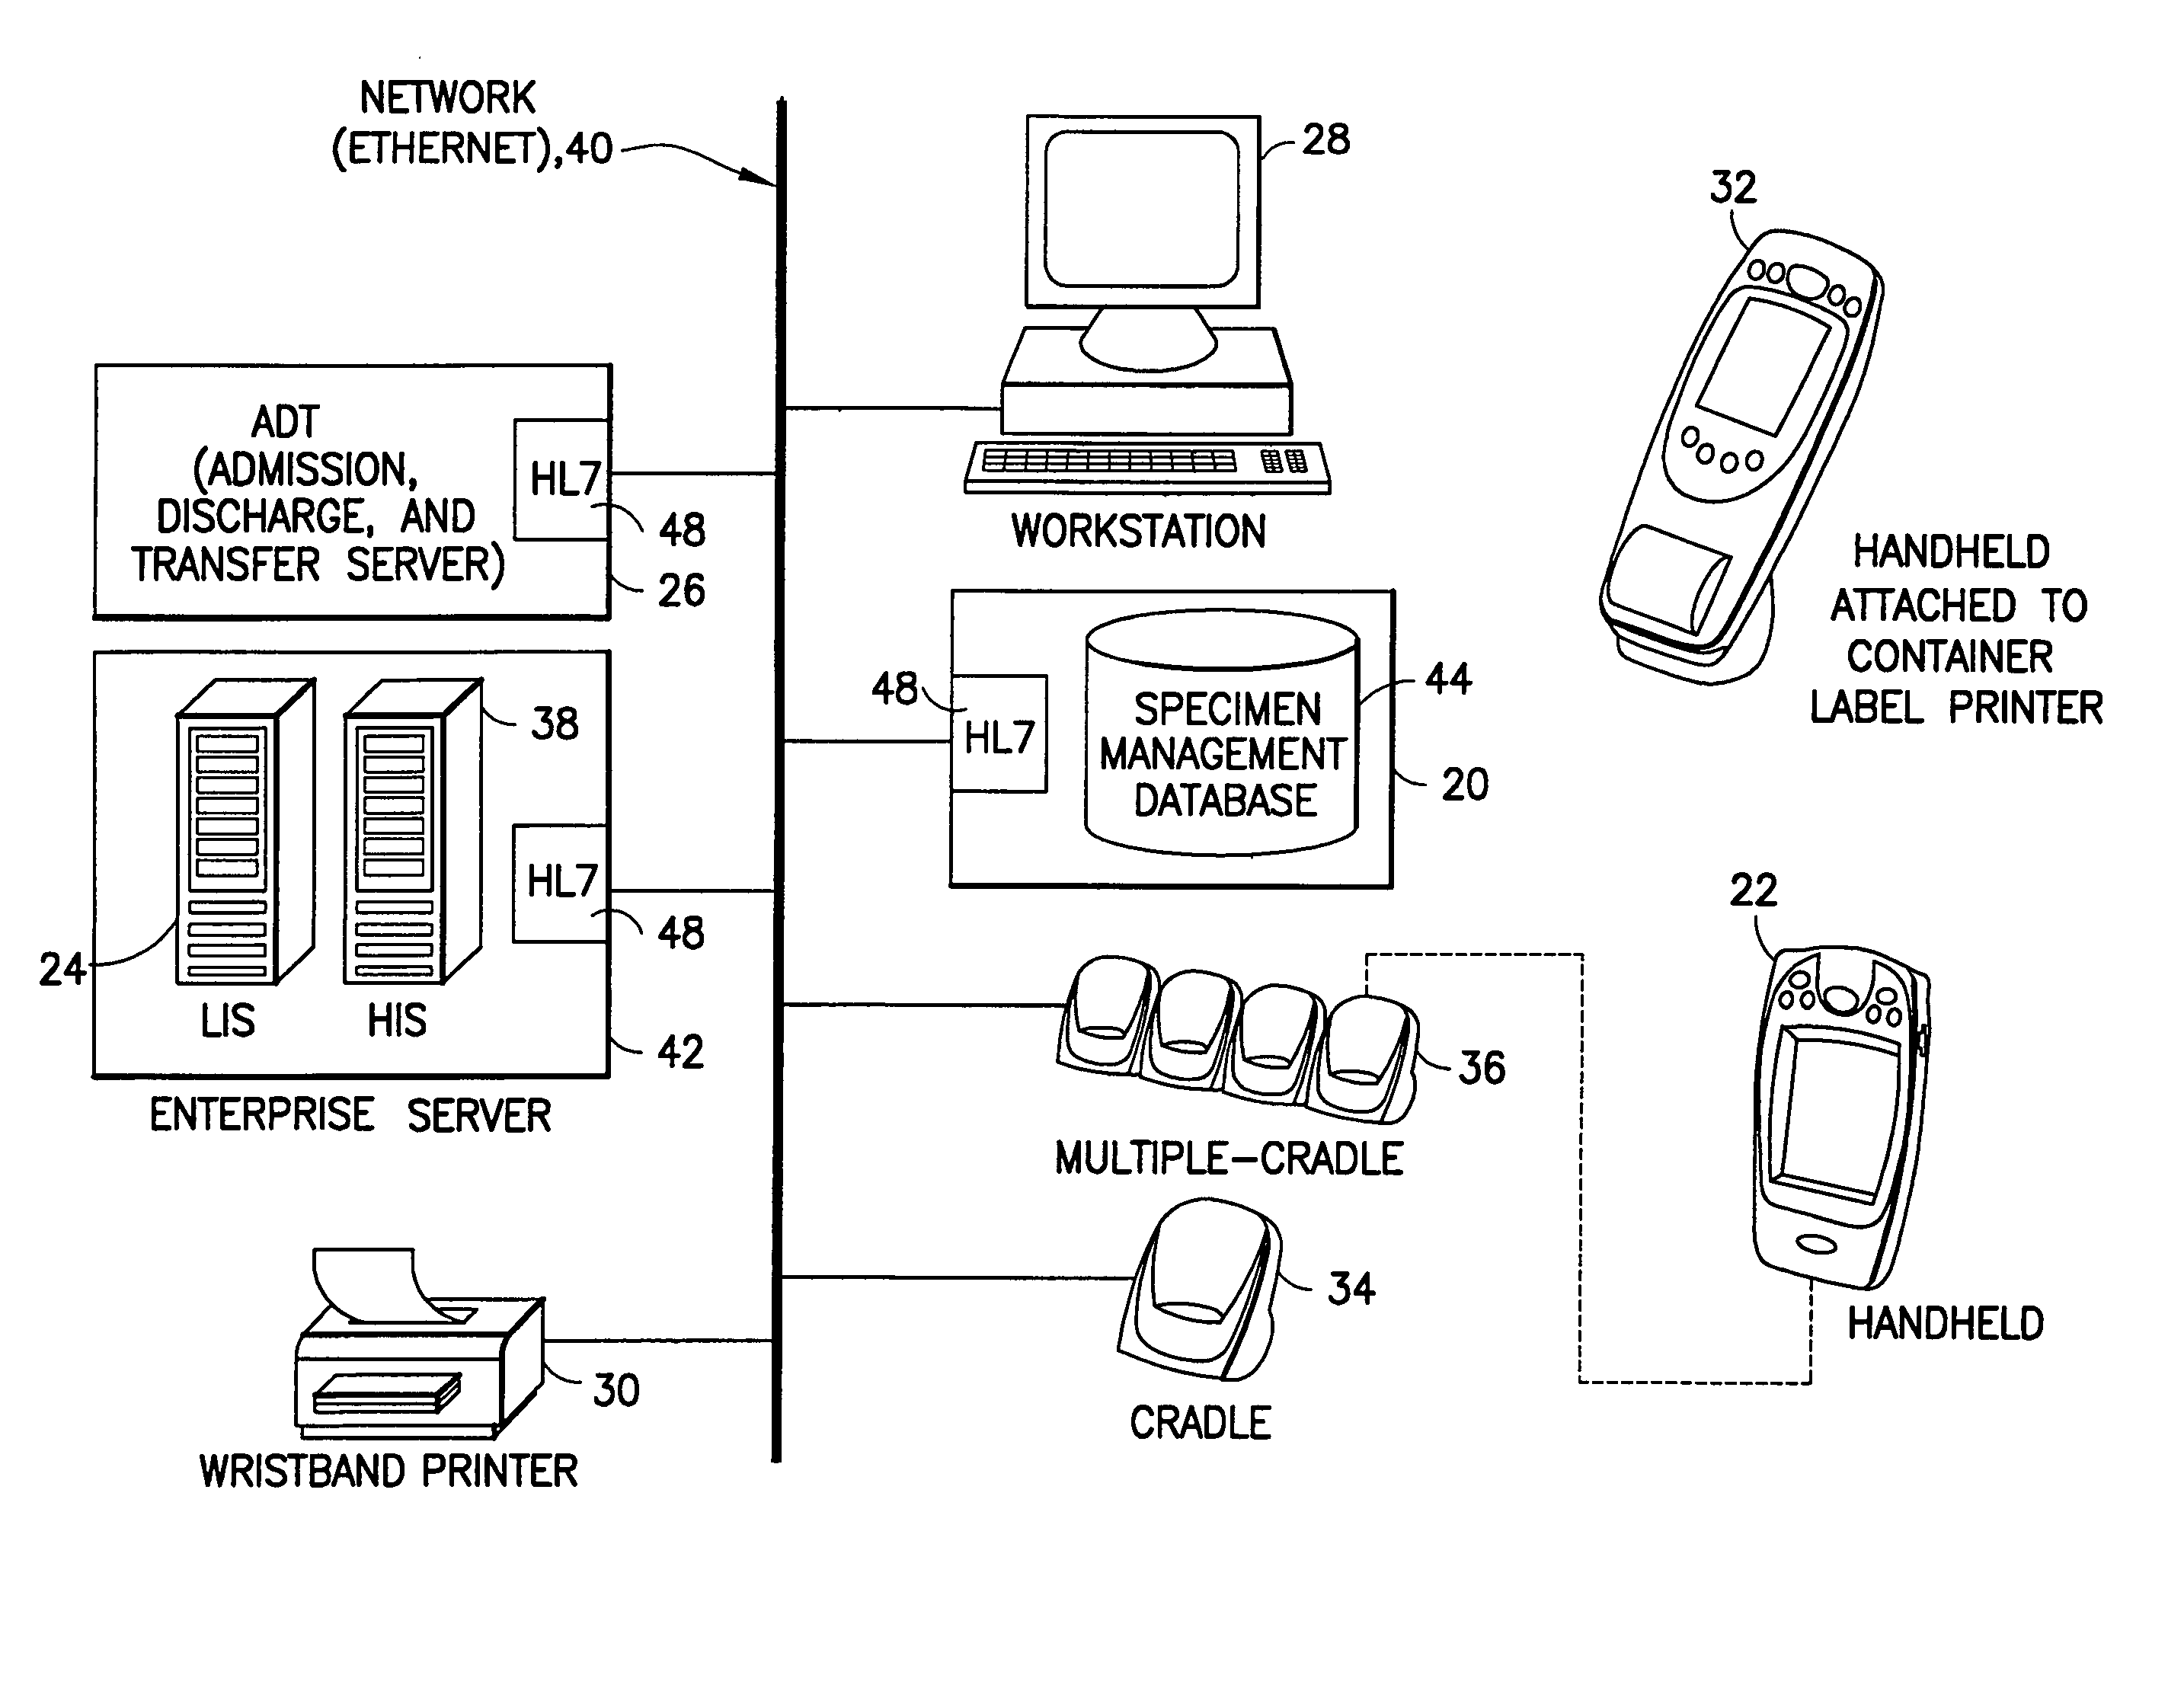 System and apparatus for efficiently utilizing network capacity in a healthcare setting